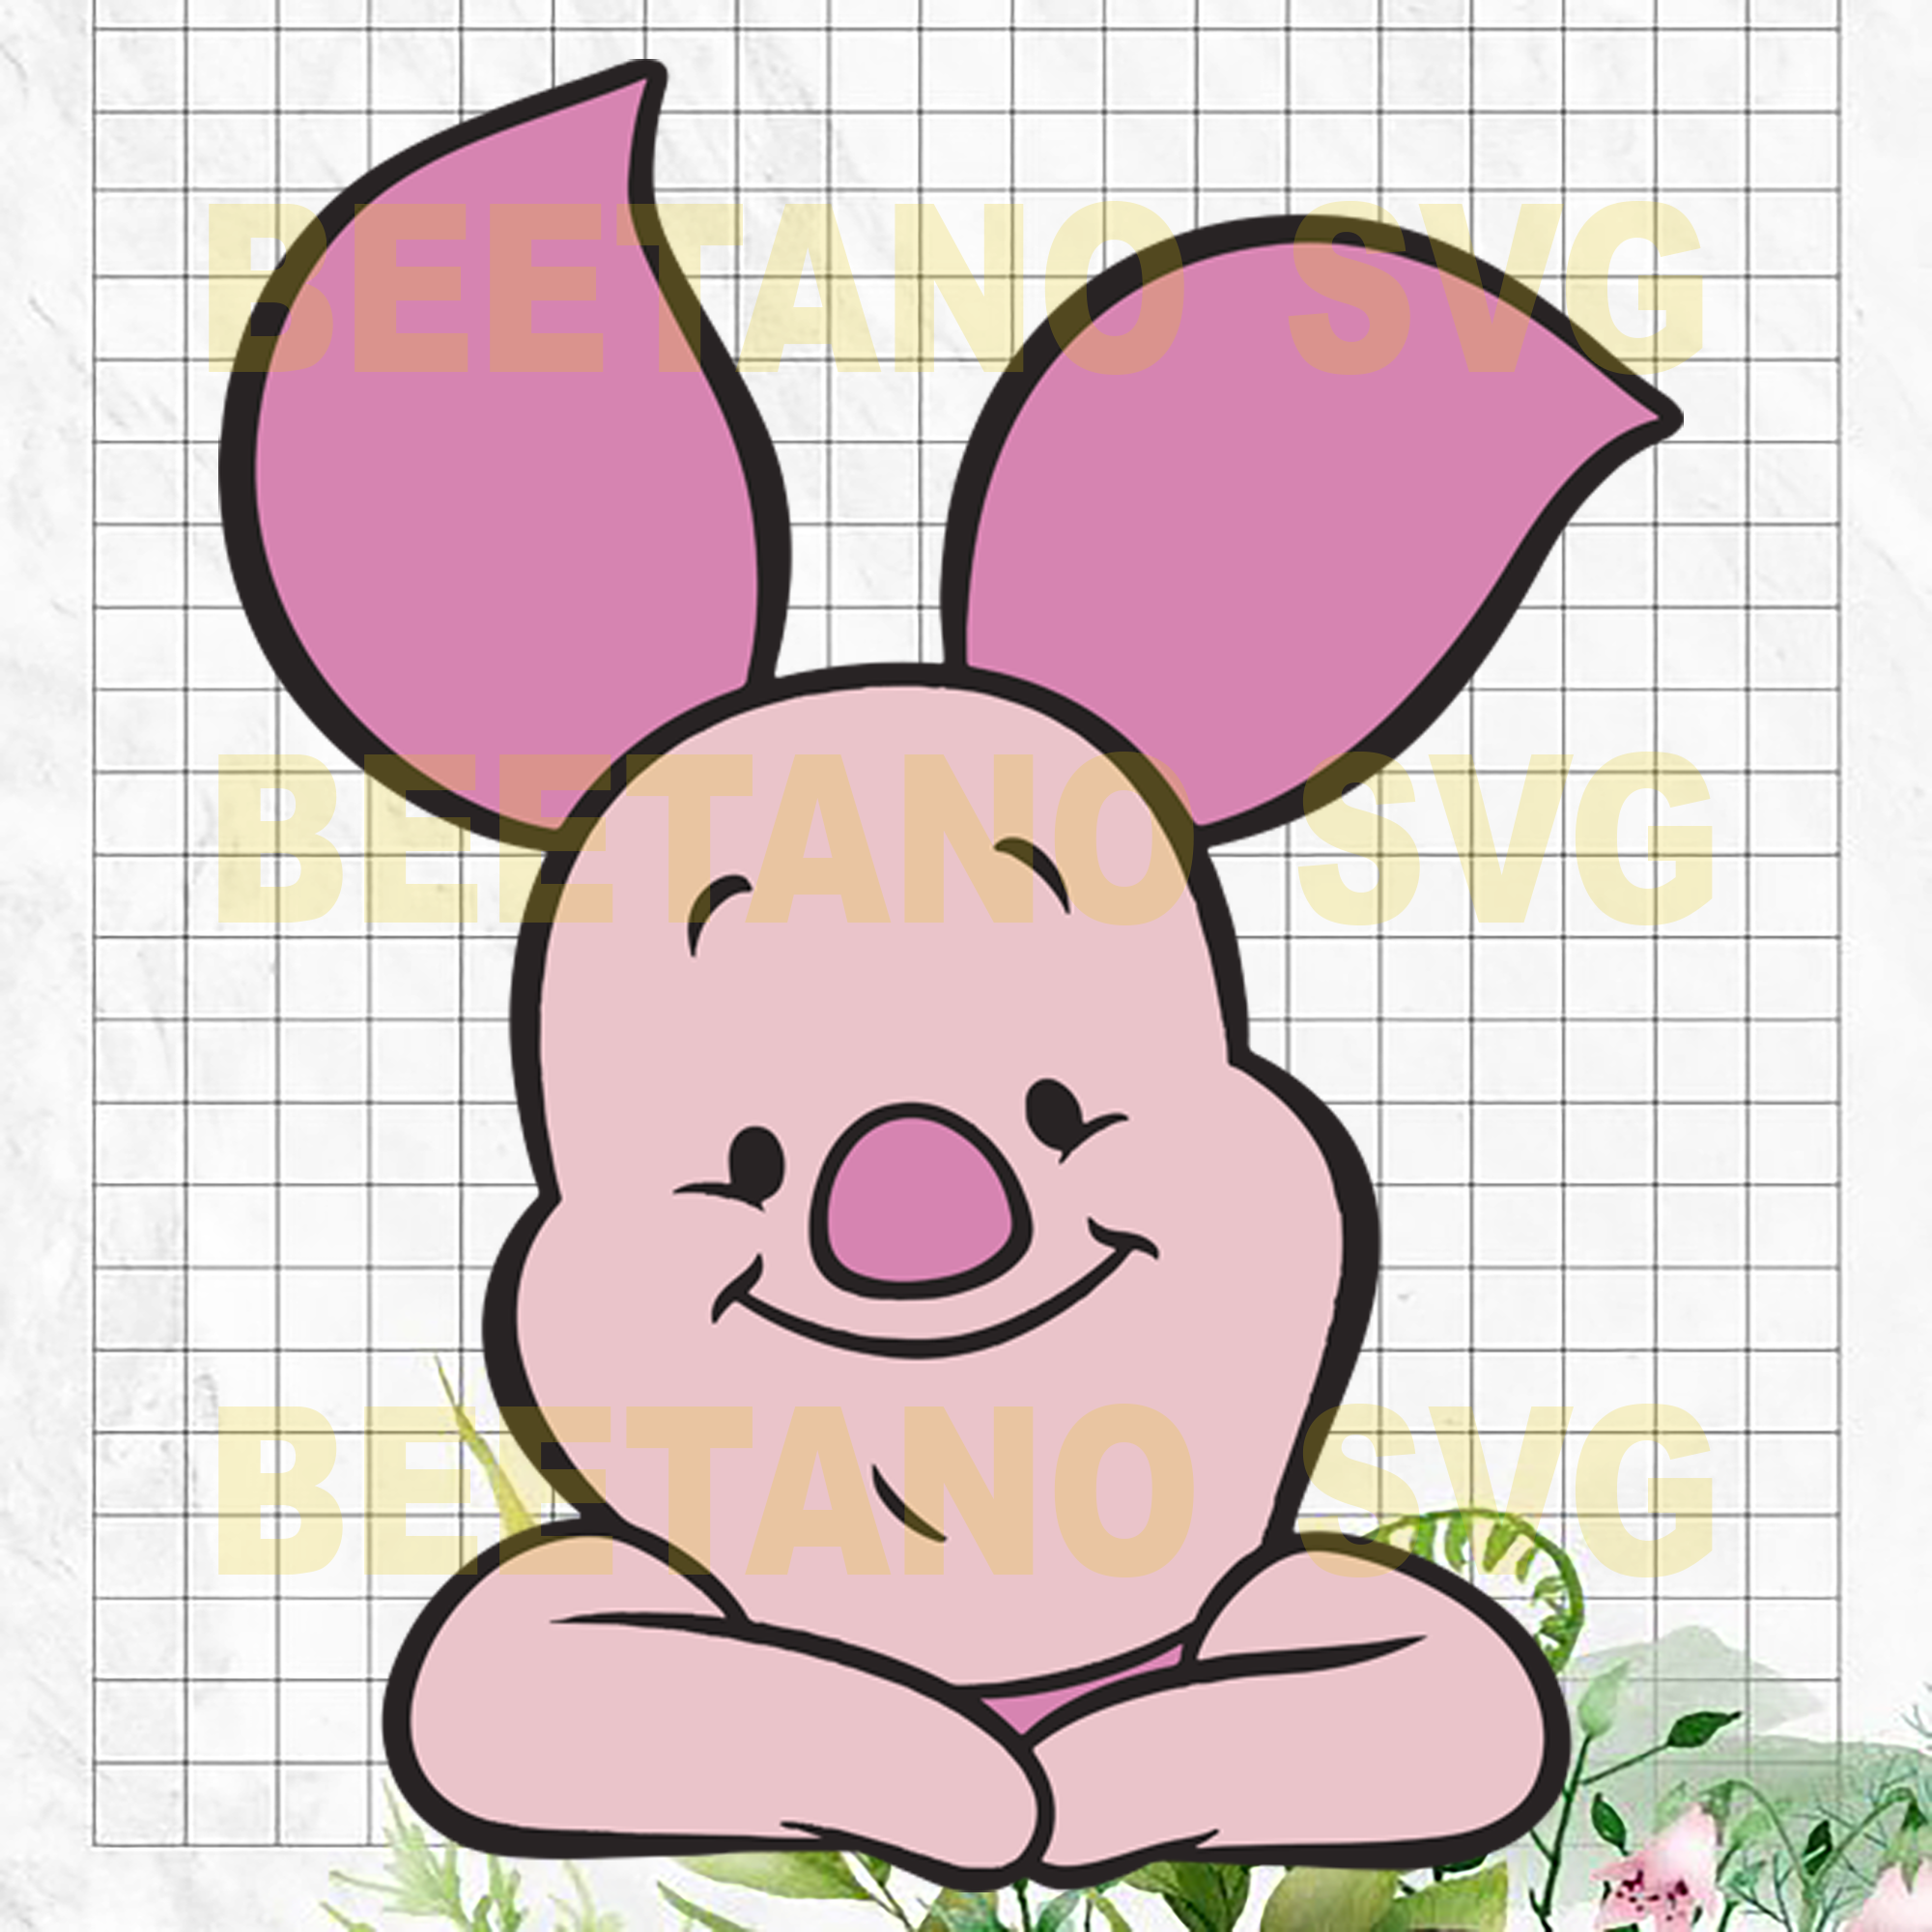 Download Piglet Winnie Pooh Svg Piglet Winnie Pooh Cutting Files For Cricut S Beetanosvg Scalable Vector Graphics